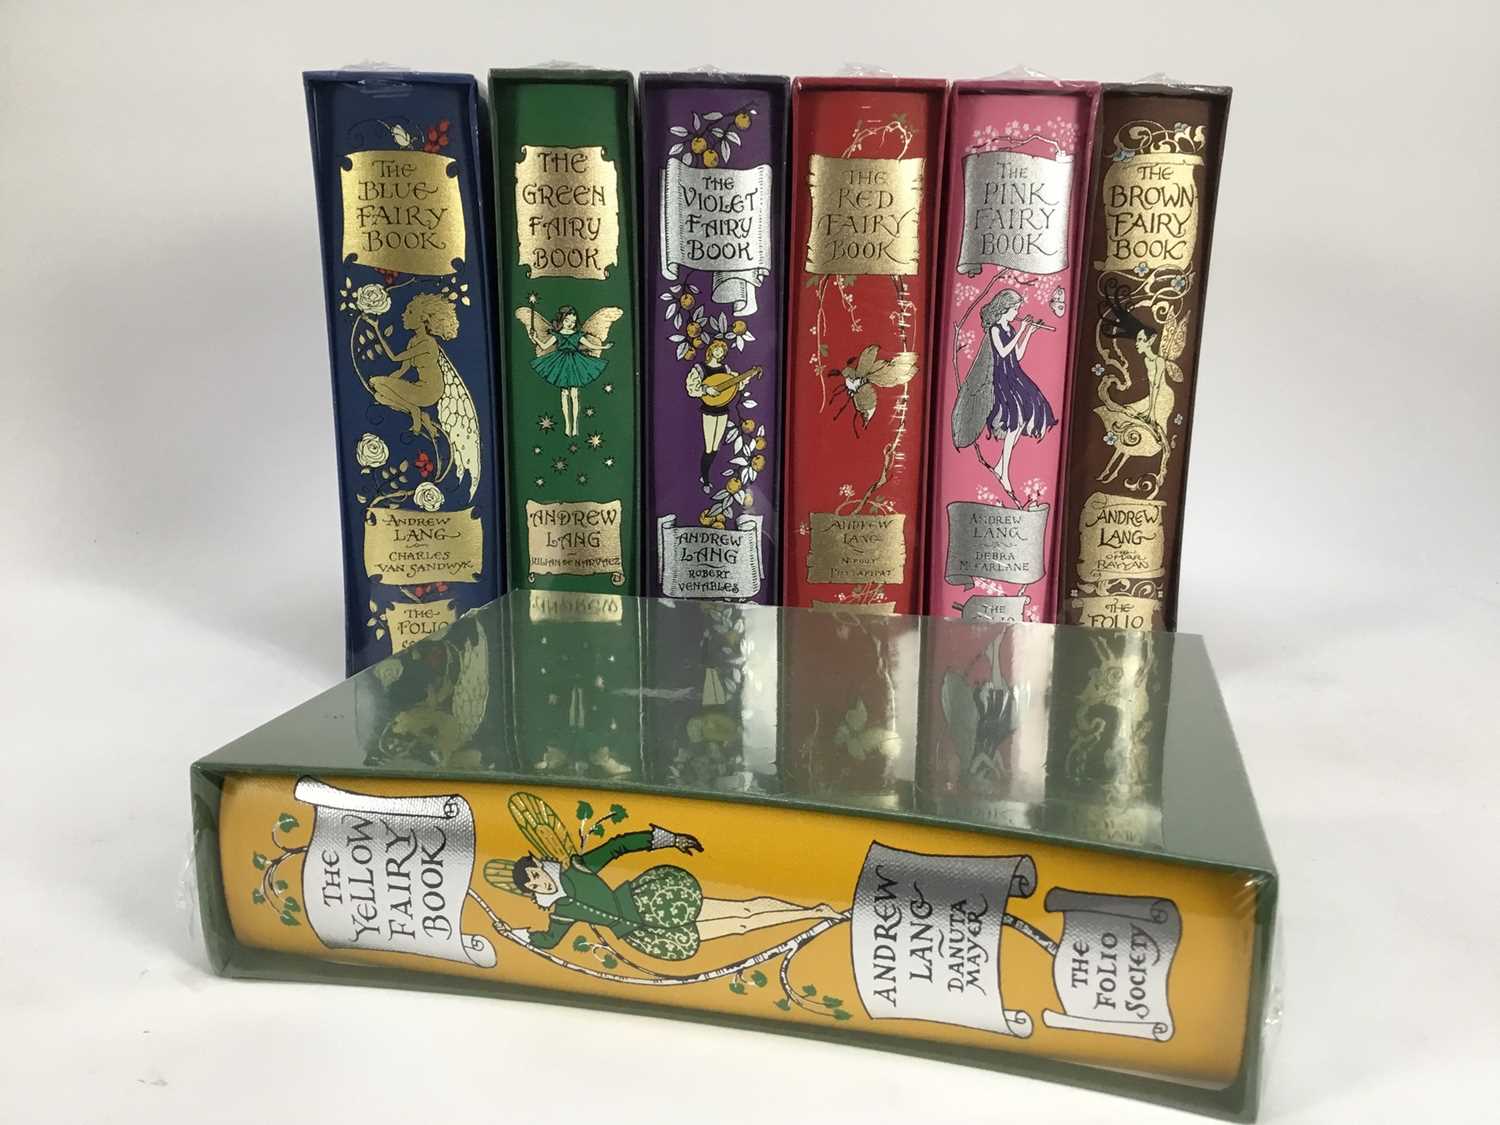 Seven Folio Society Rainbow Fairy Books by Andrew Lang, still sealed in original plastic wrapping - Image 6 of 7